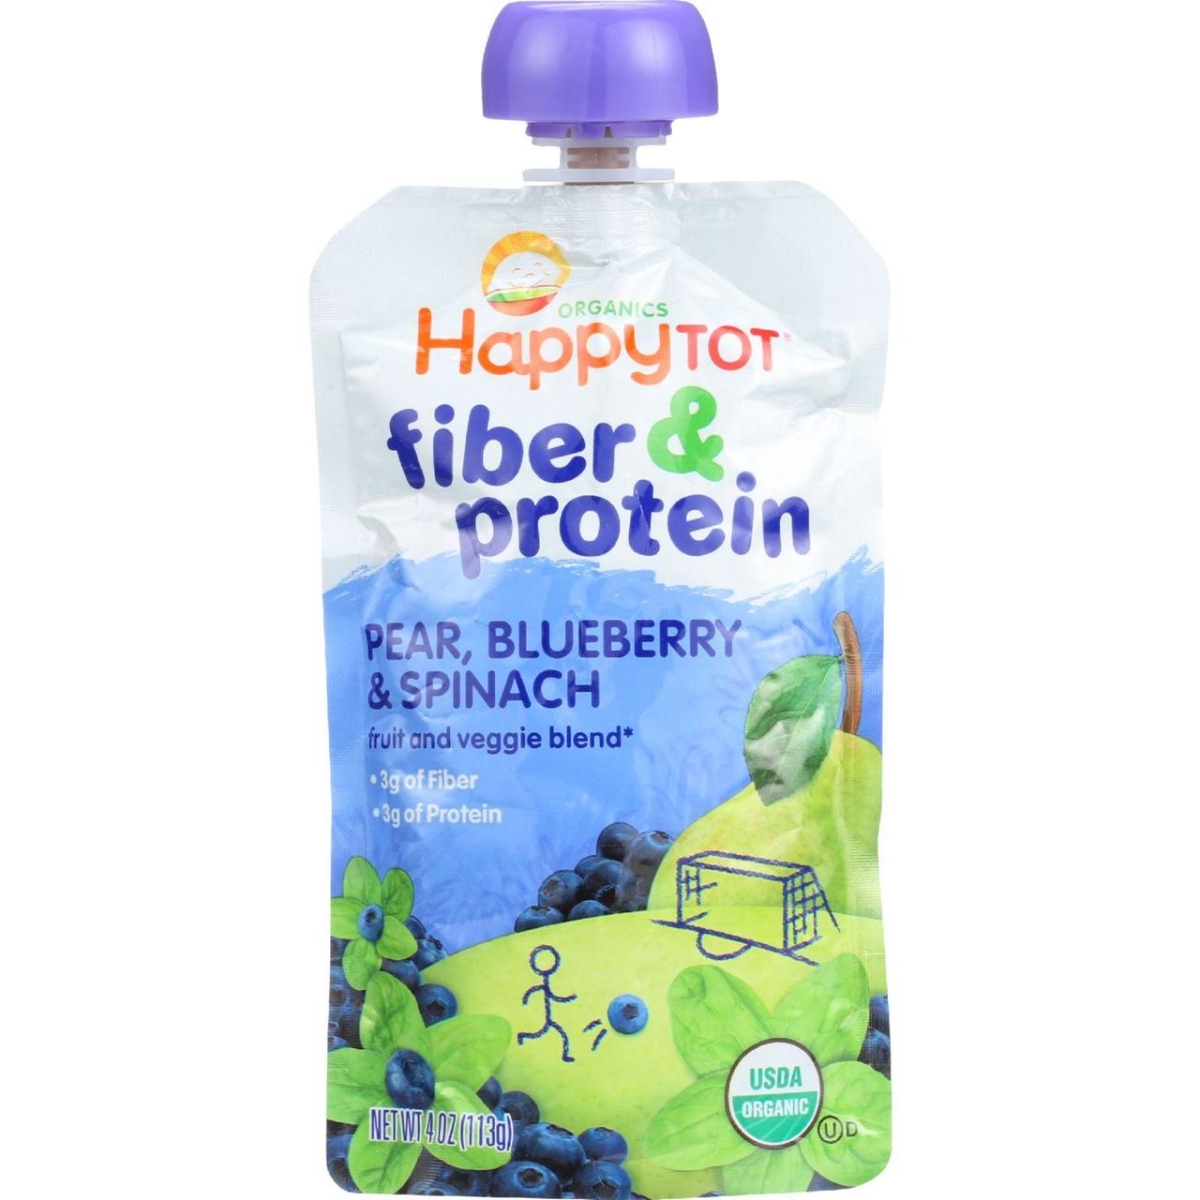 Hg1620087 4 O Z Organic Fiber & Protein Stage 4 Pear Blueberry & Spinach Toddler Food, Case Of 16